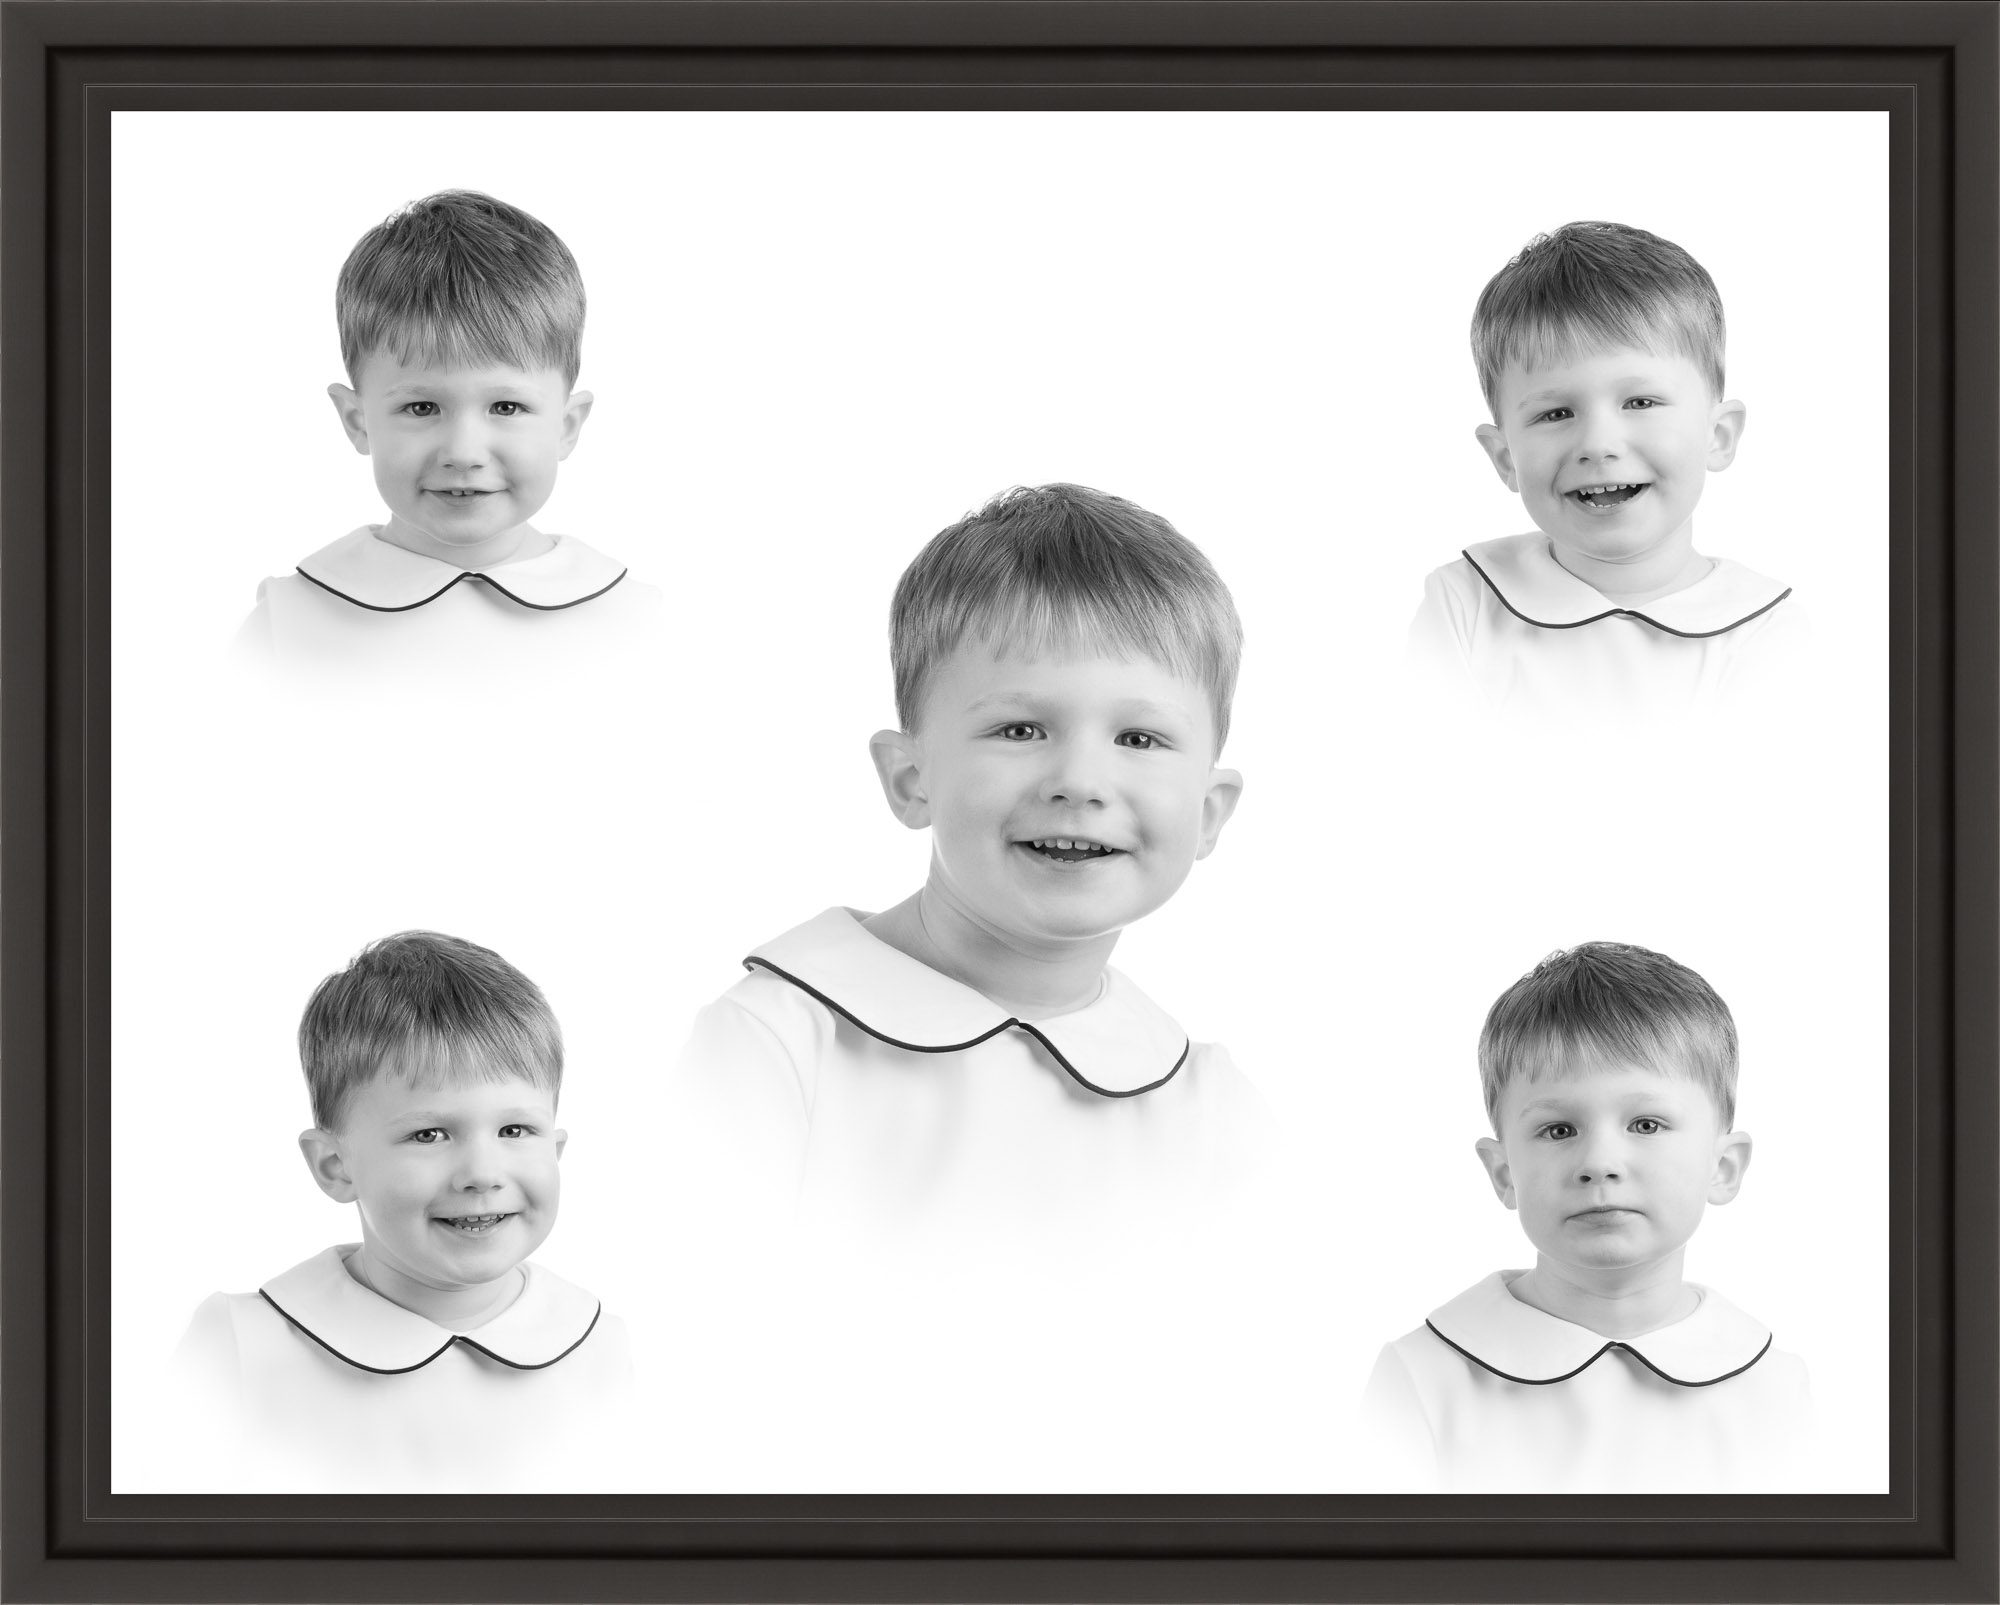 heirloom portrait composite showing 5 expressions | Lisa Maco Photography DC Heirloom Portrait Photographer